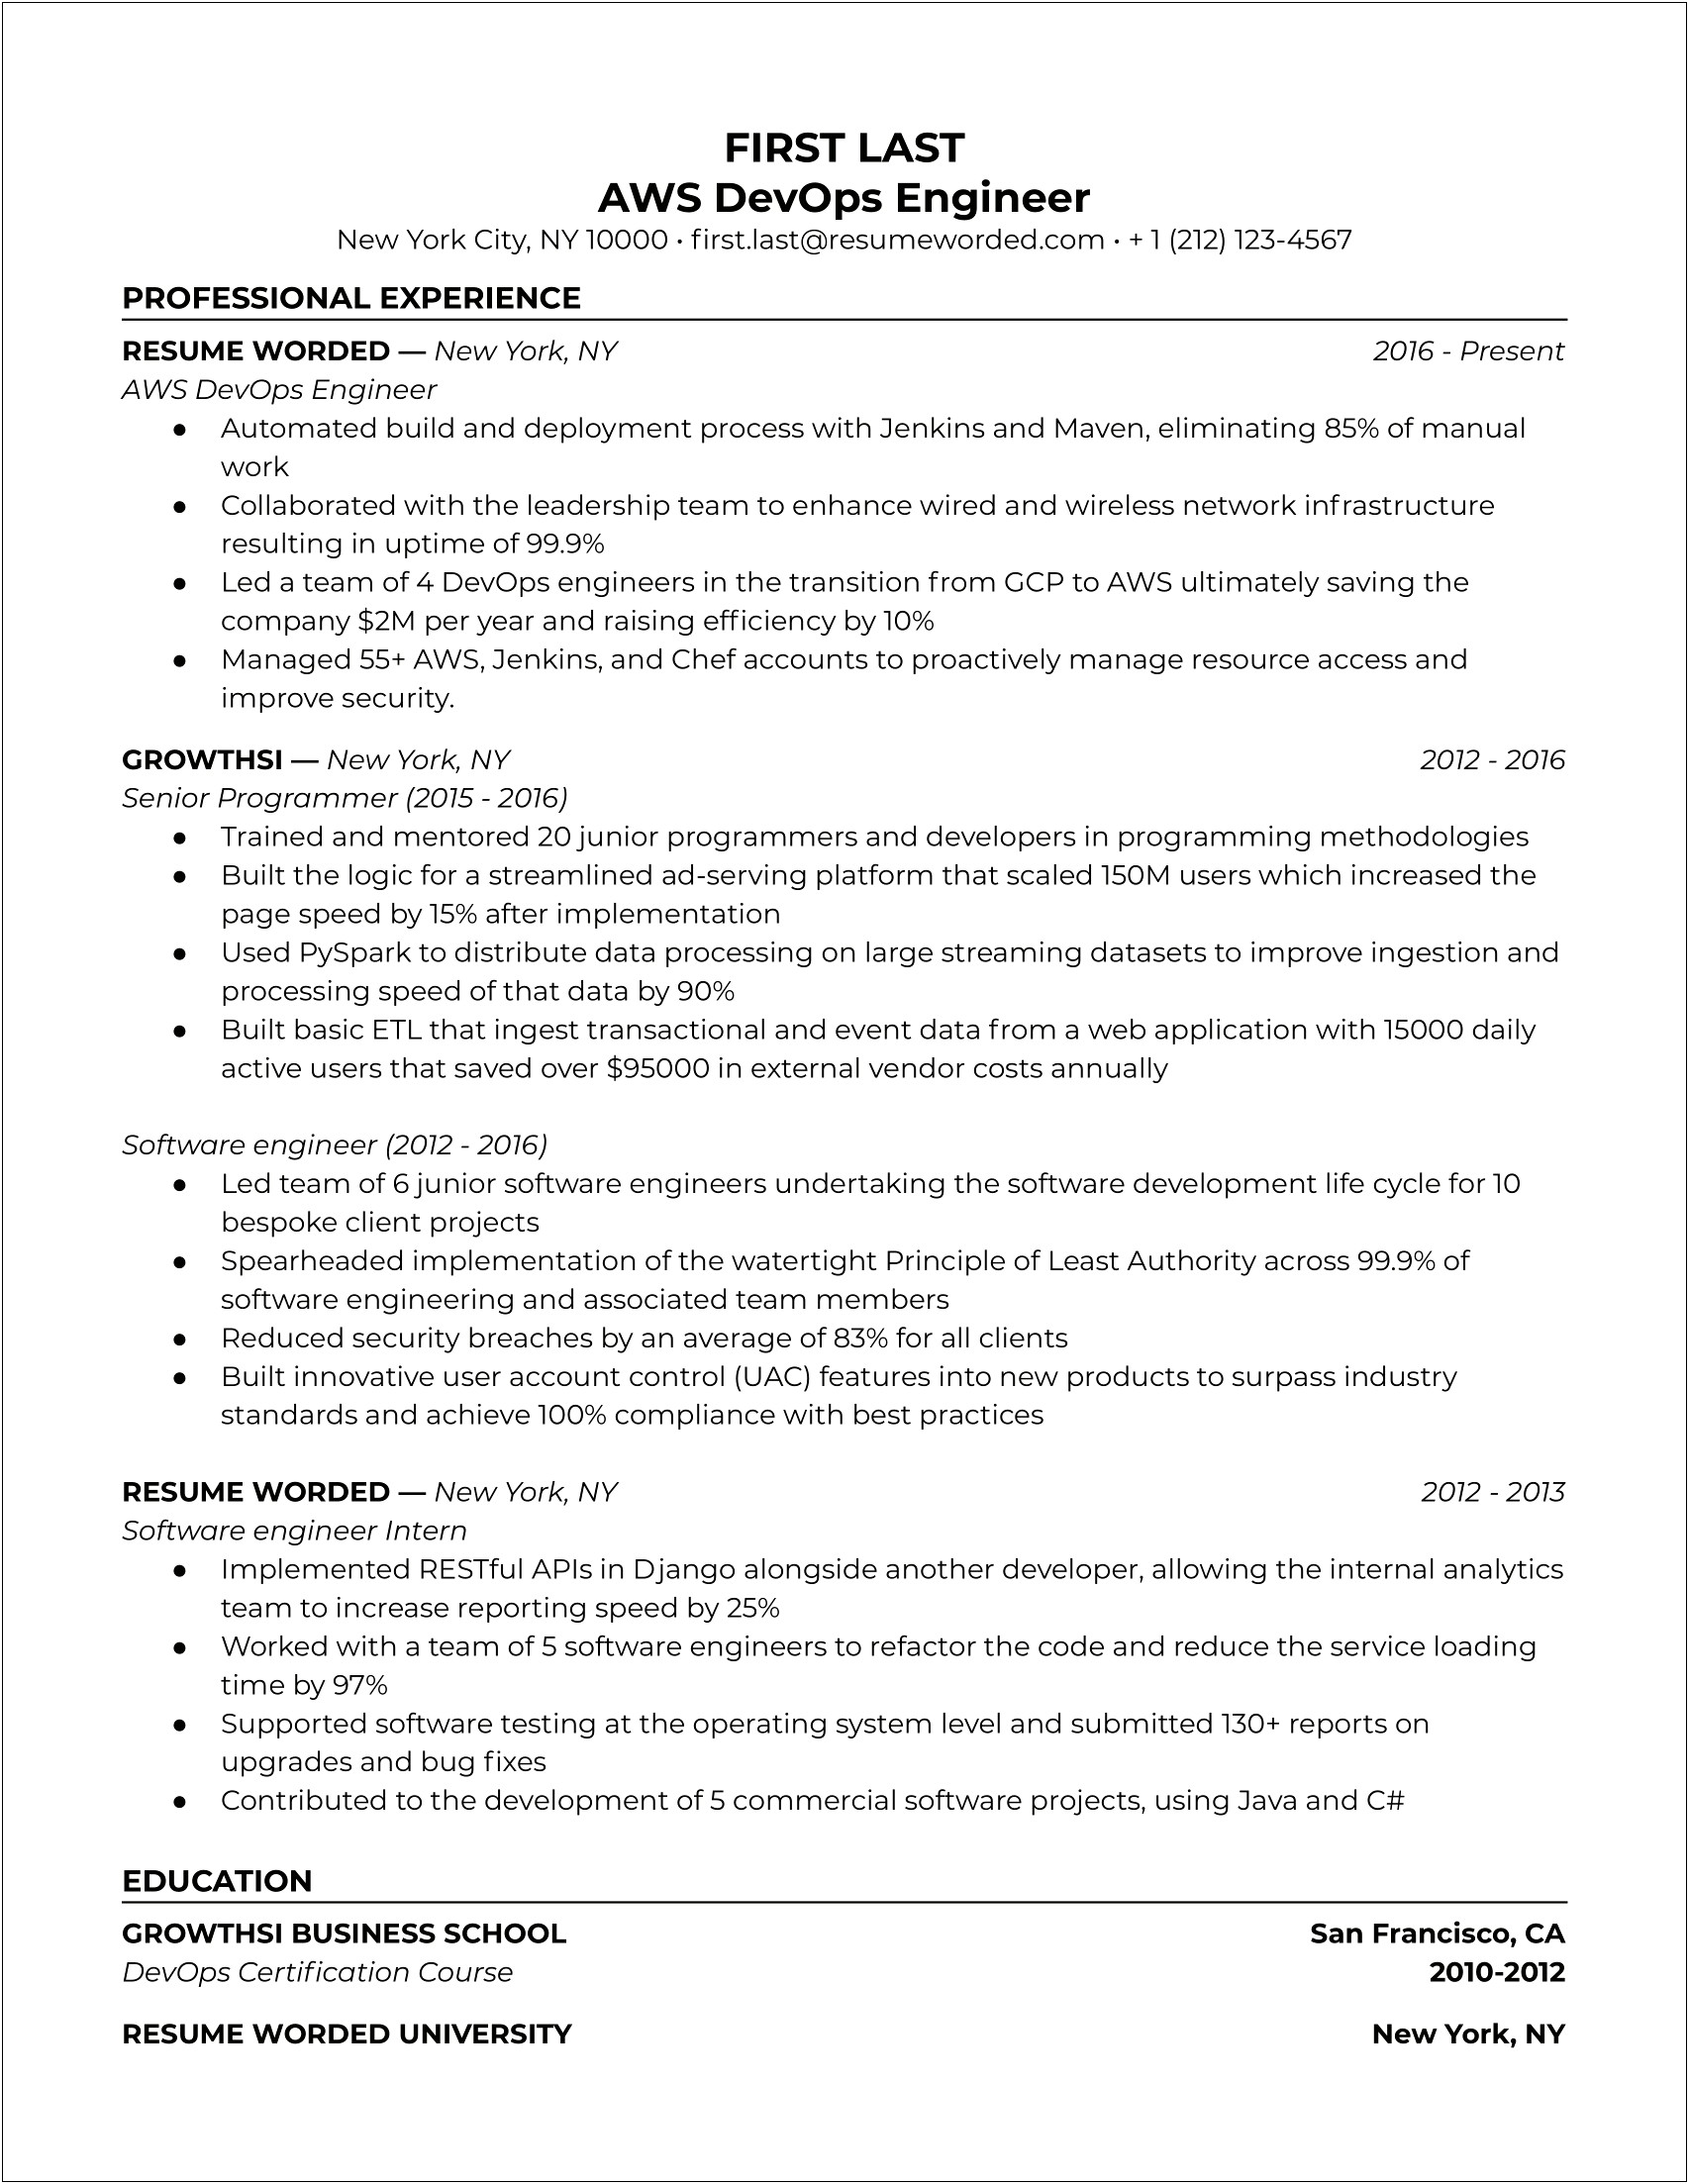 Devops Resume Over 8 Years Of Experience